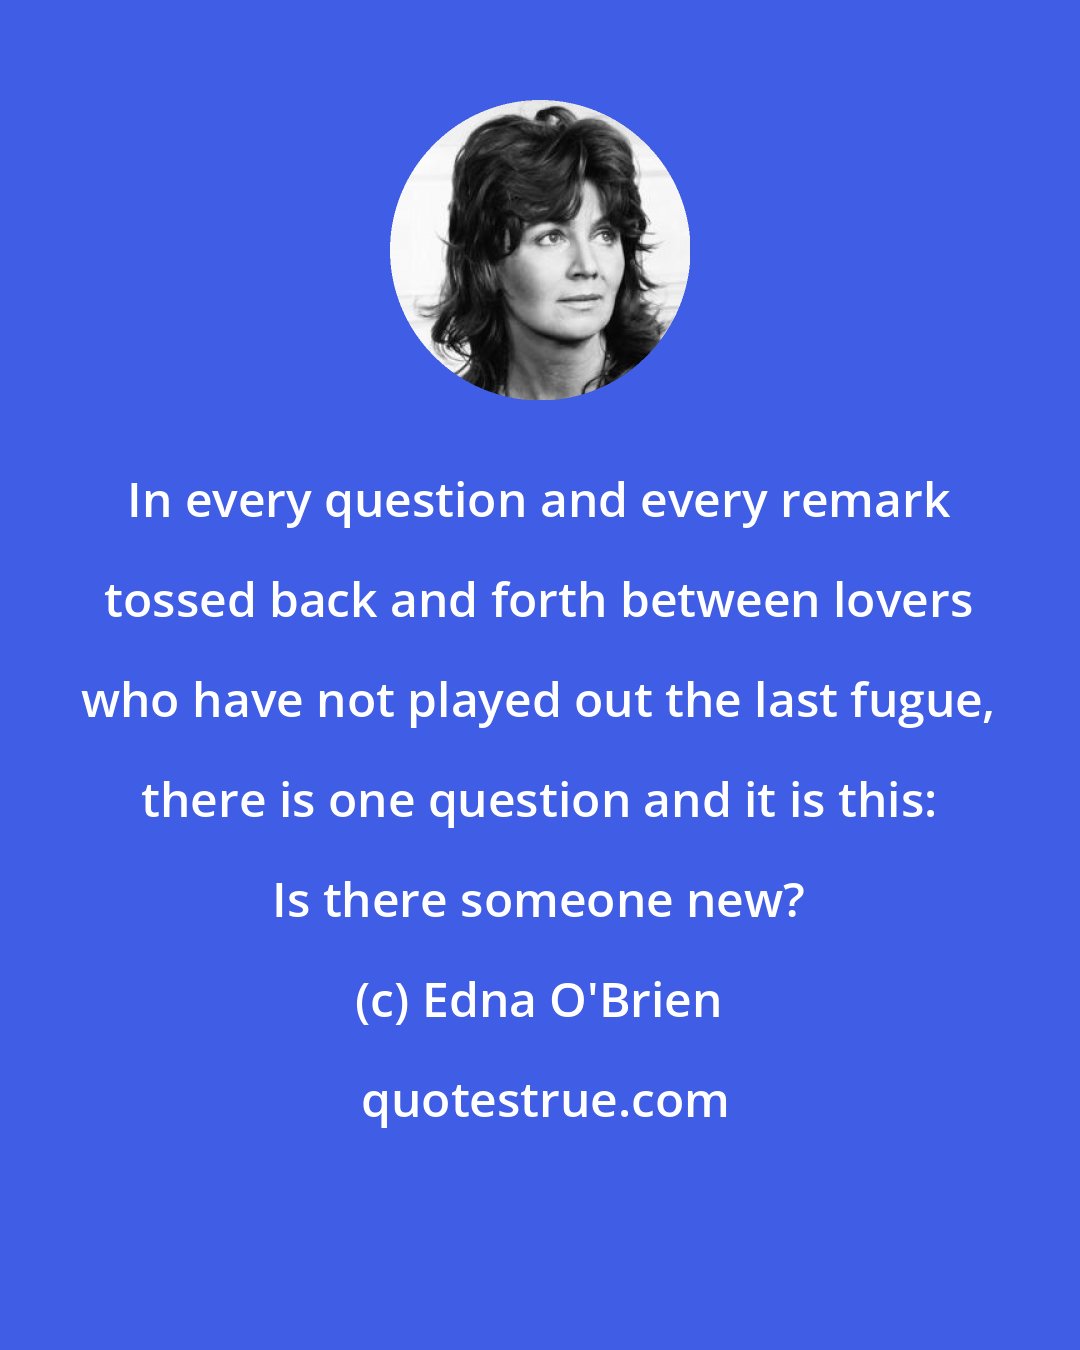 Edna O'Brien: In every question and every remark tossed back and forth between lovers who have not played out the last fugue, there is one question and it is this: Is there someone new?